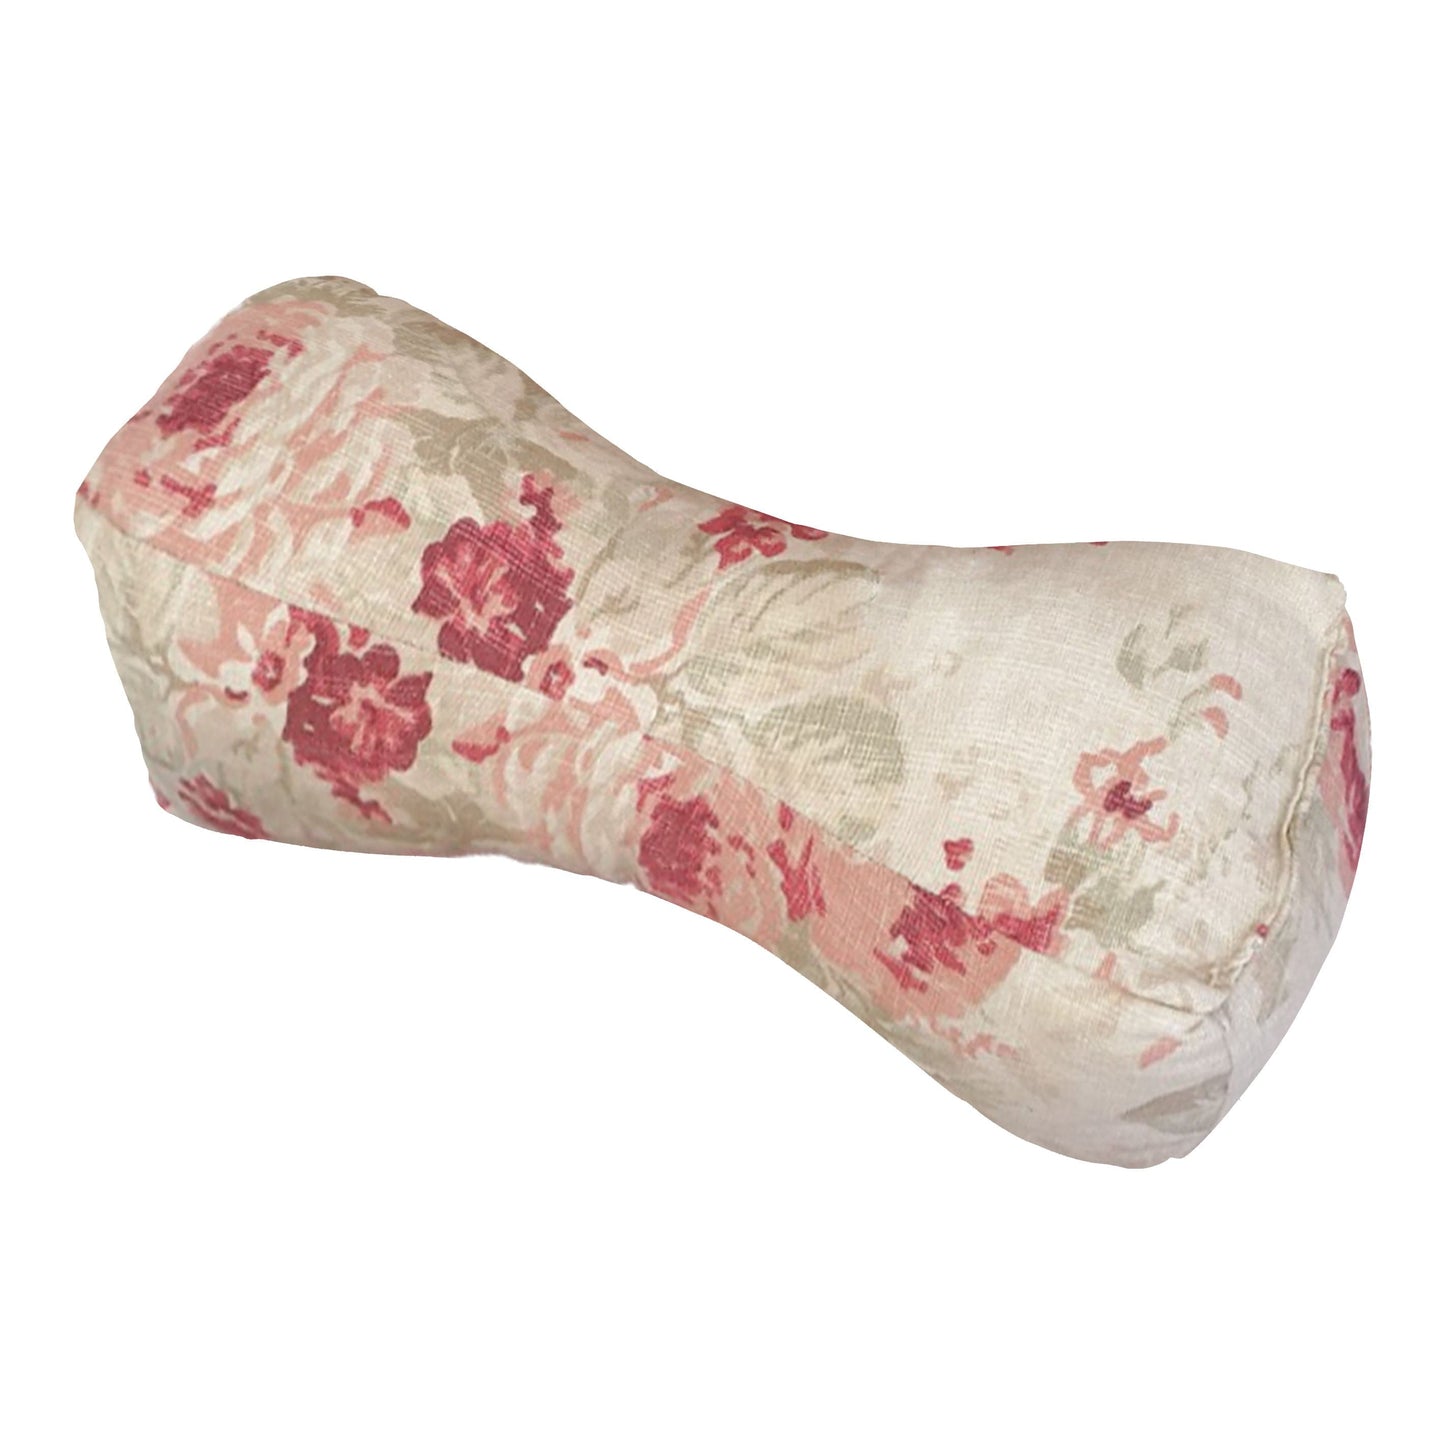 Chablis Rose Travel Buddy Neck Support Pillow